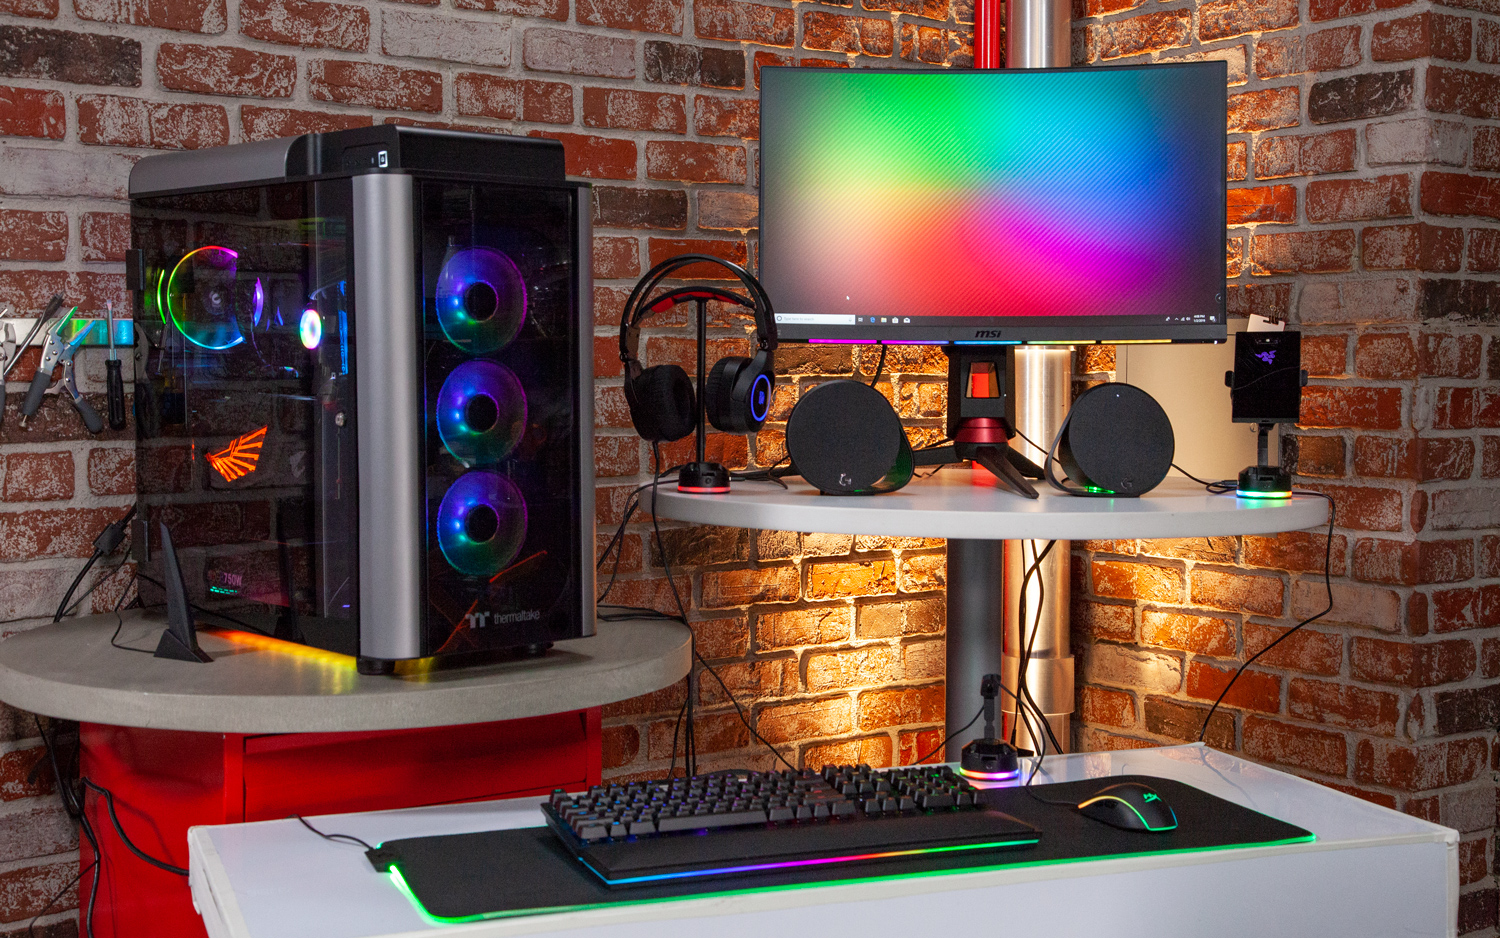 The RGBeast PC: What We Learned Building an RGB Battlestation